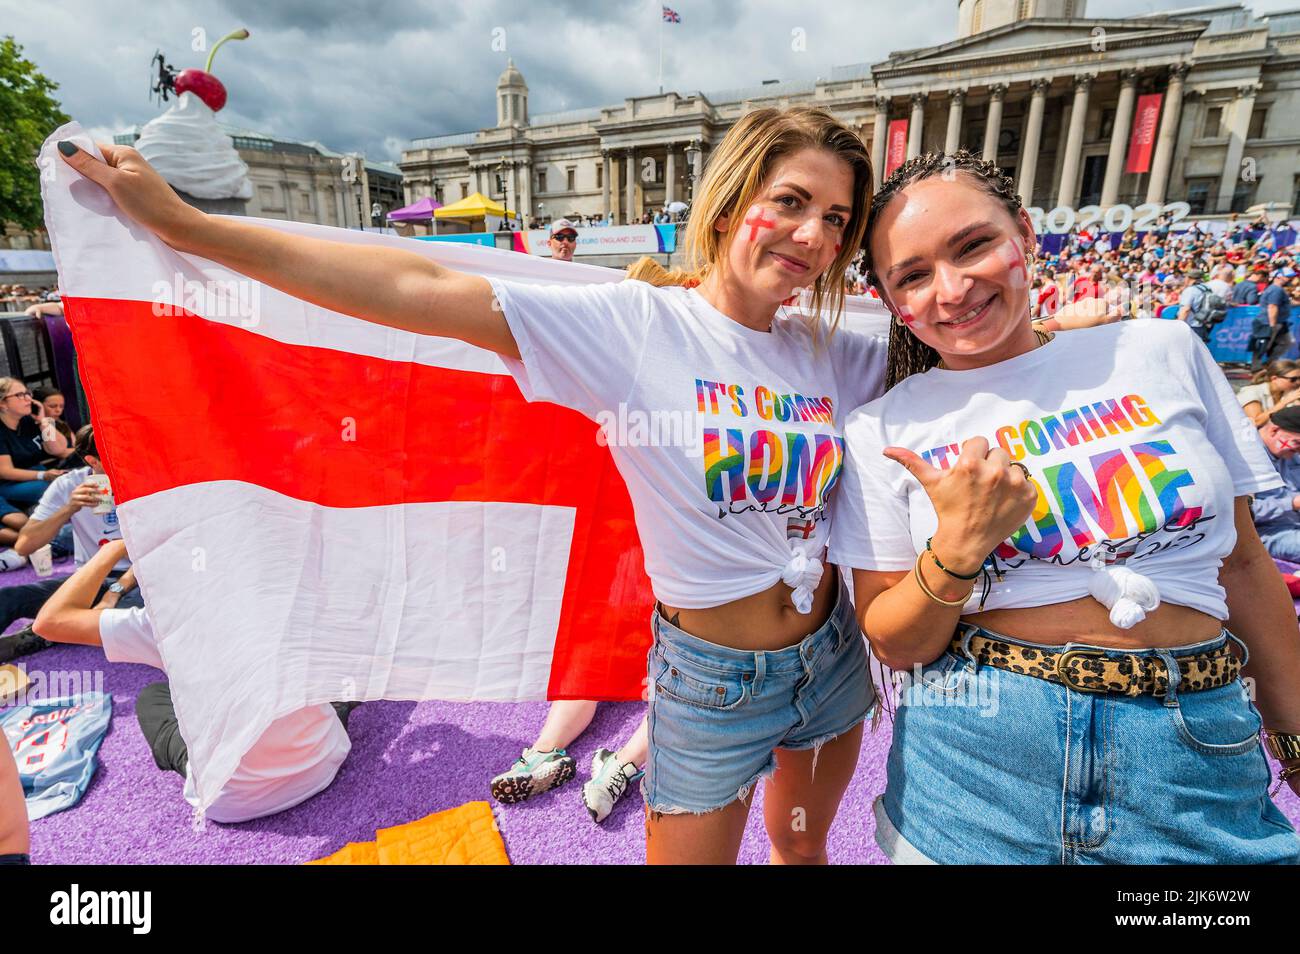 London, UK. 31st July, 2022. Its coming home - England v Germany UEFA Women's EURO 2022 final match fanzone in Trafalgar Square. Organised by the Mayor of London Sadiq Khan, and tournament organisers. It offered free access for up to 7,000 supporters. Credit: Guy Bell/Alamy Live News Stock Photo